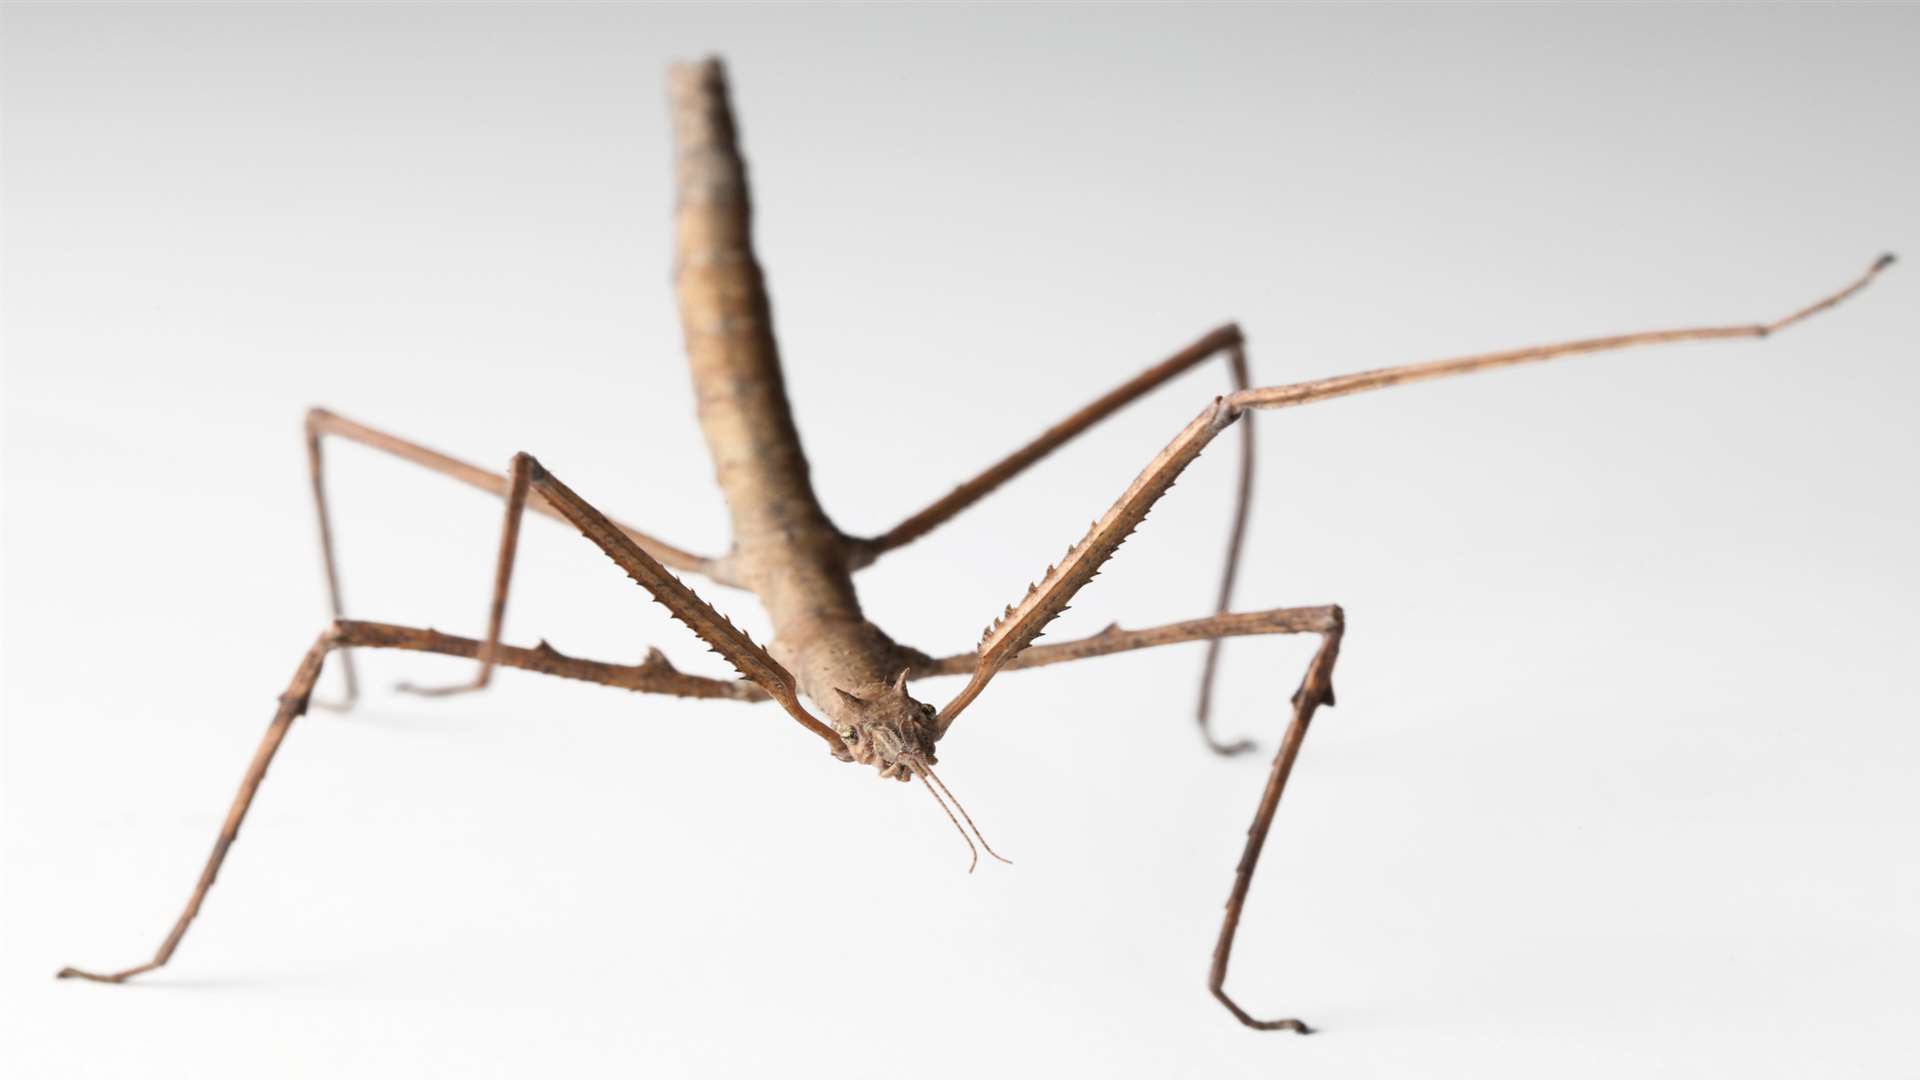 Stick insects will also be on show